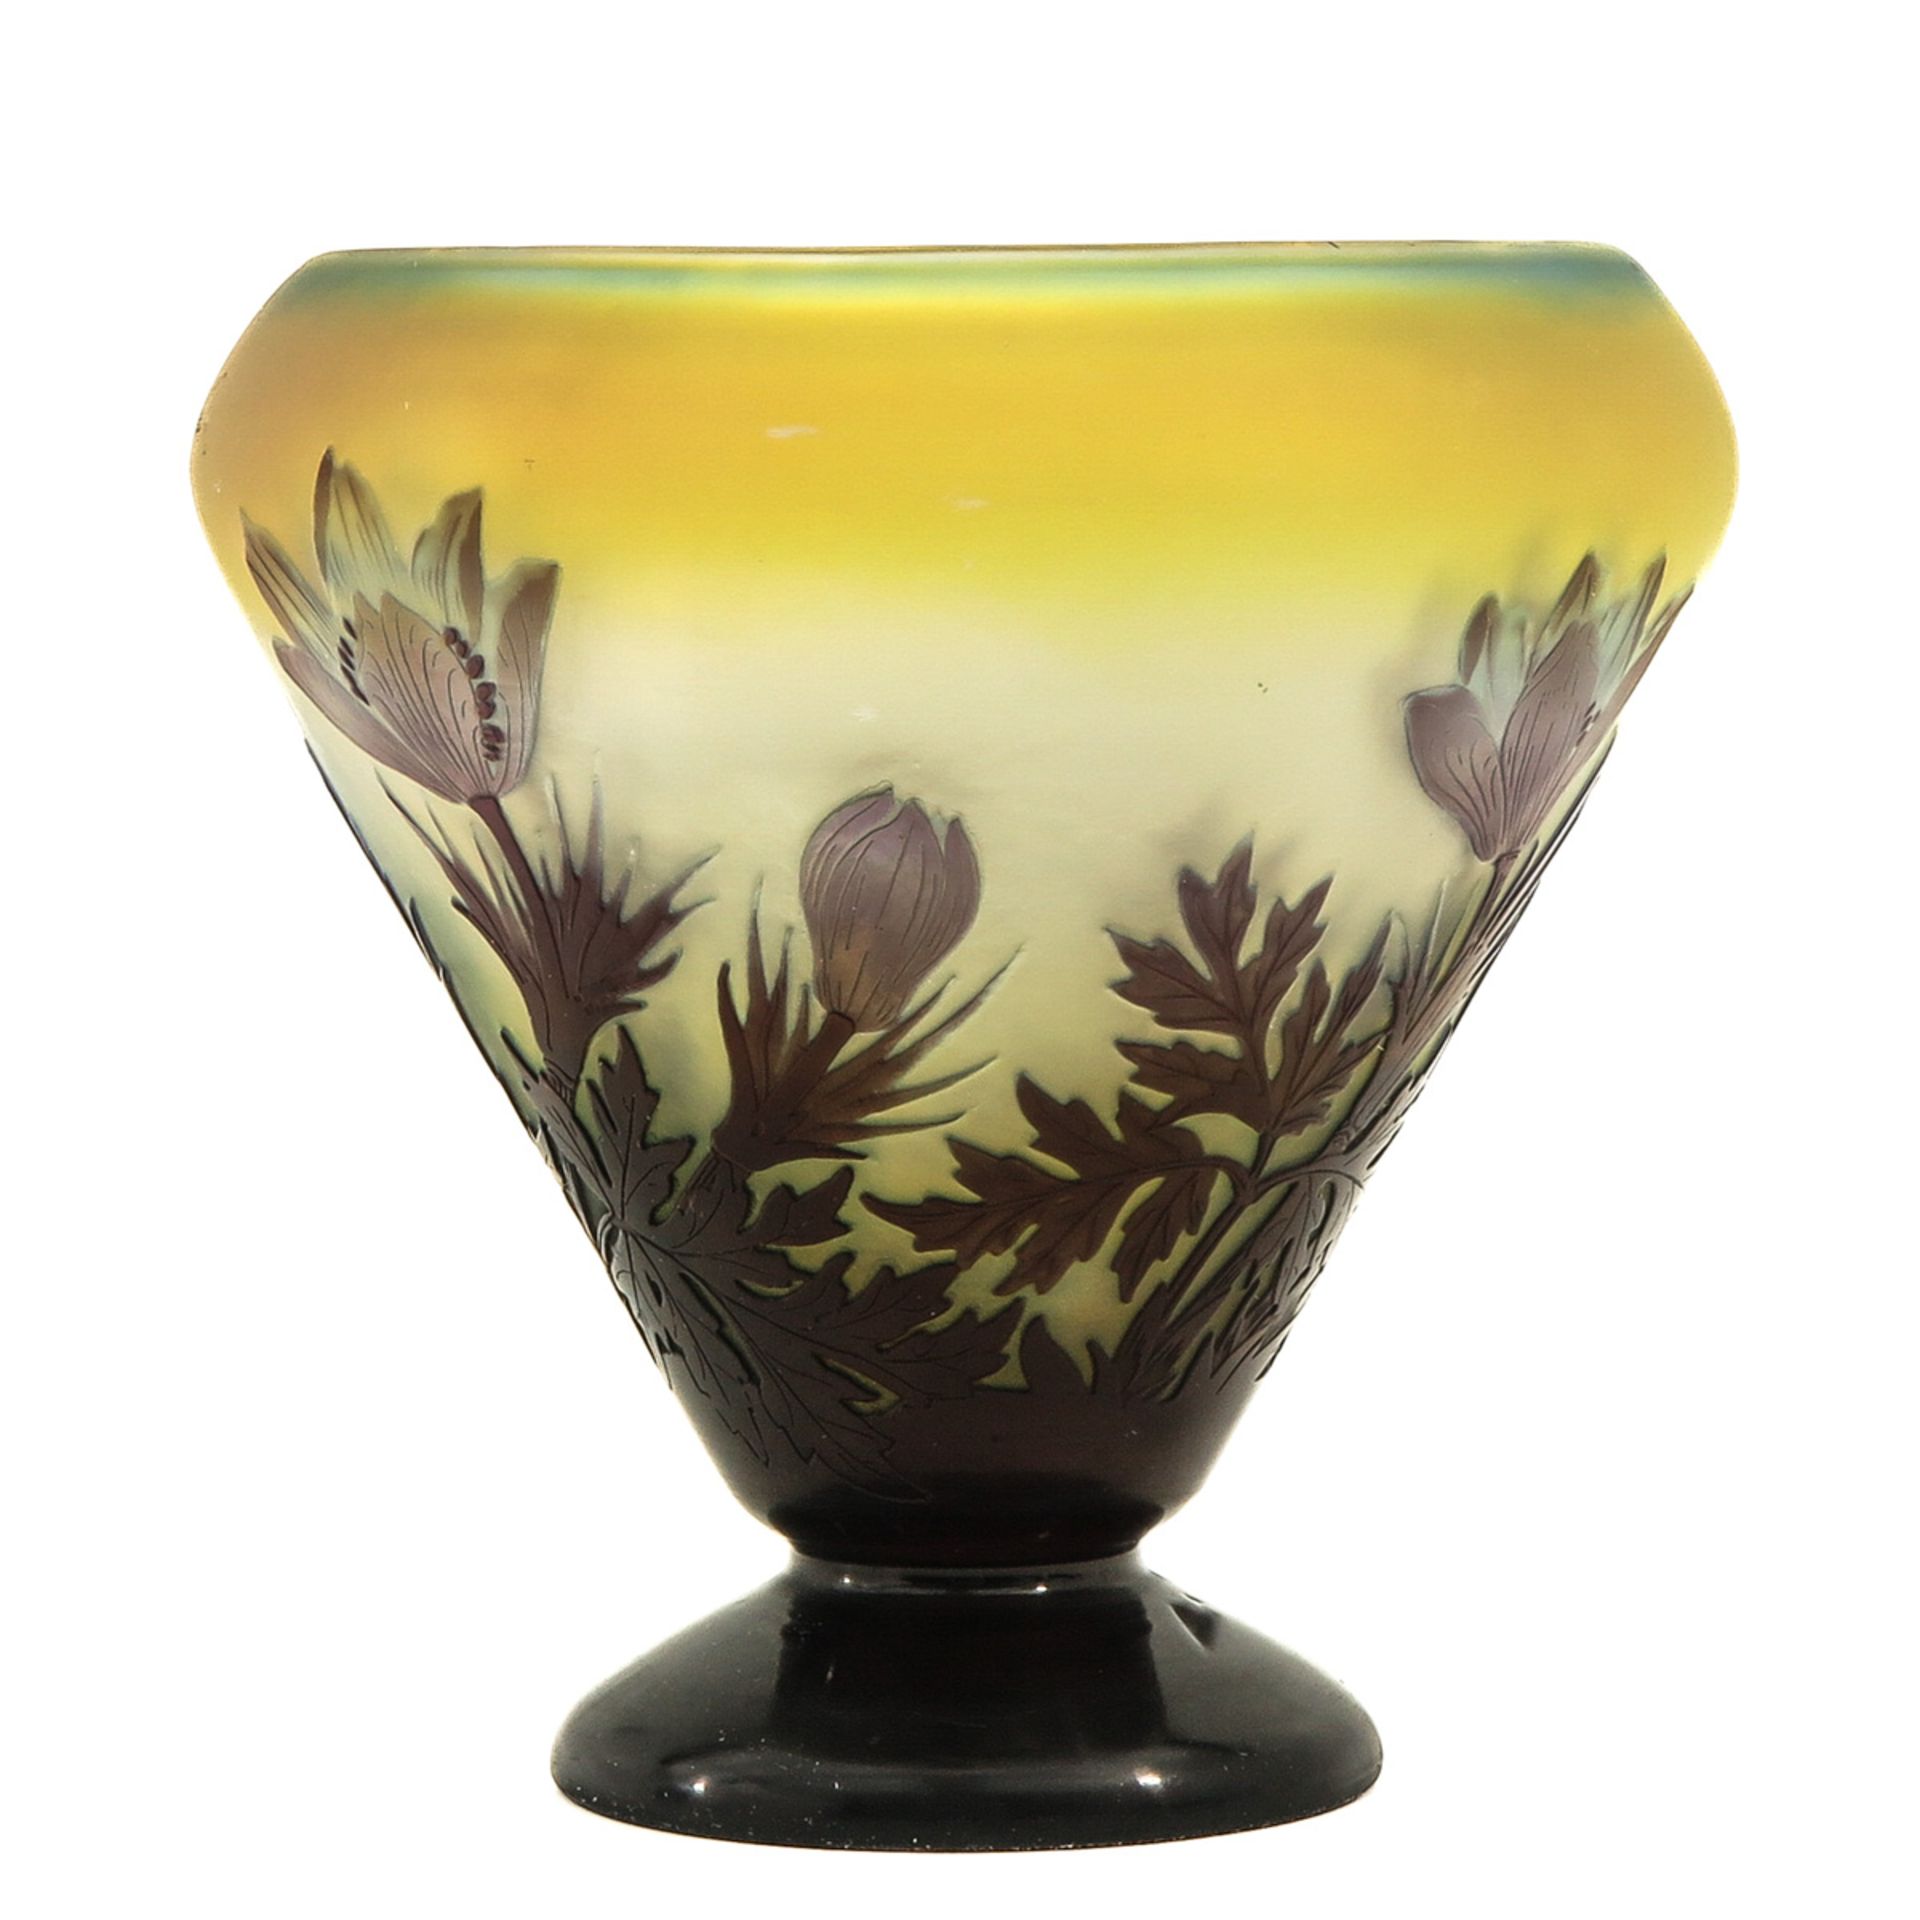 A Signed Galle Vase - Image 3 of 8